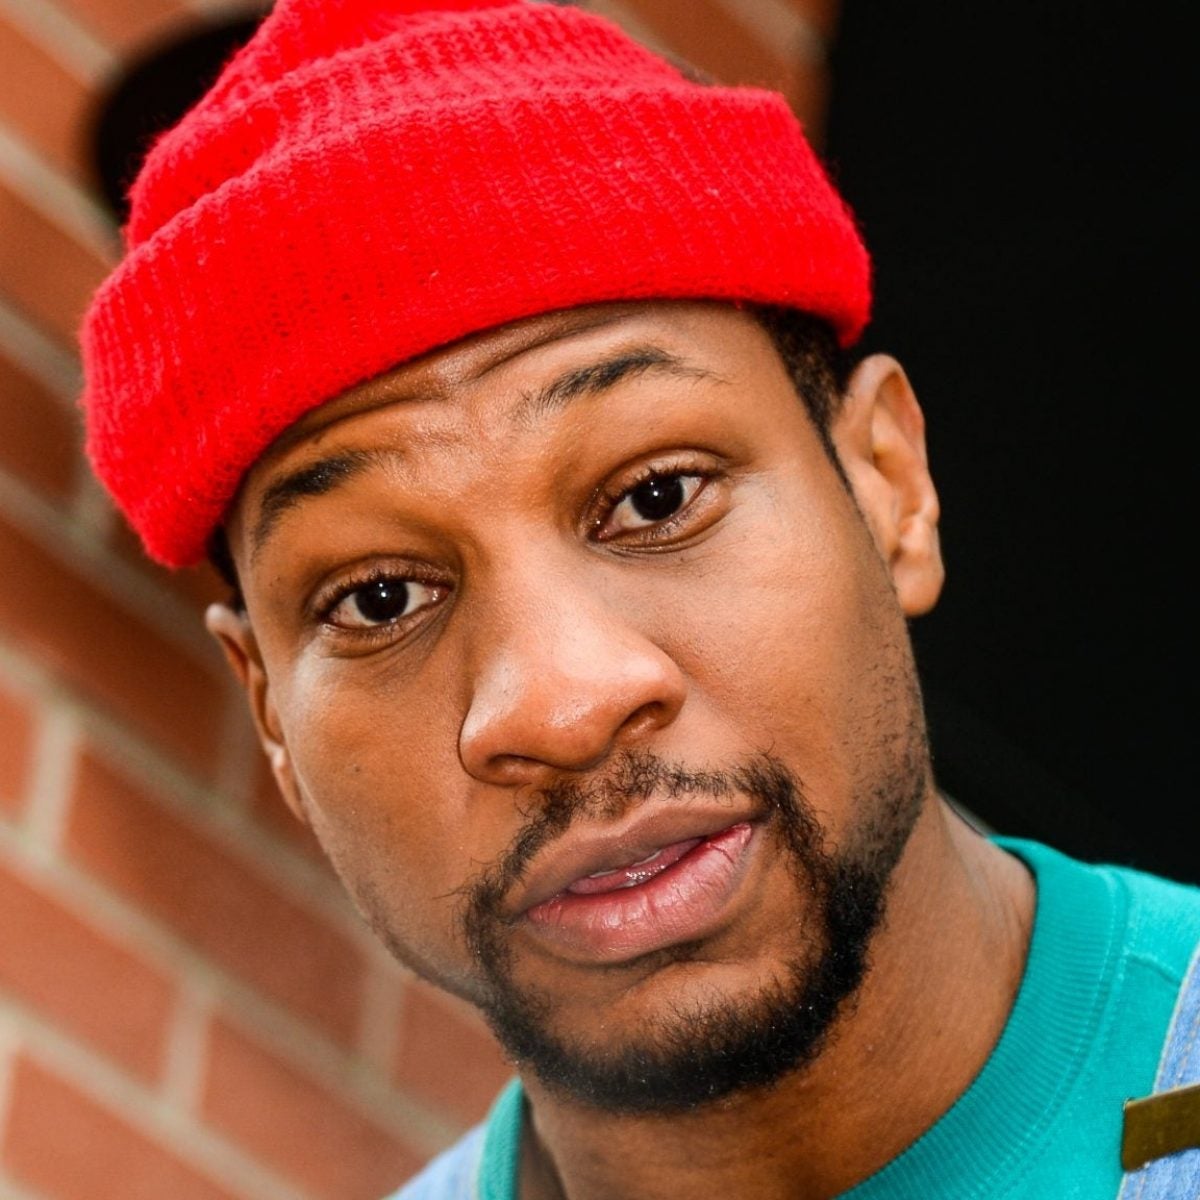 Jonathan Majors Is Set To Take On A Lead Role In Marvel’s ‘Ant-Man 3’